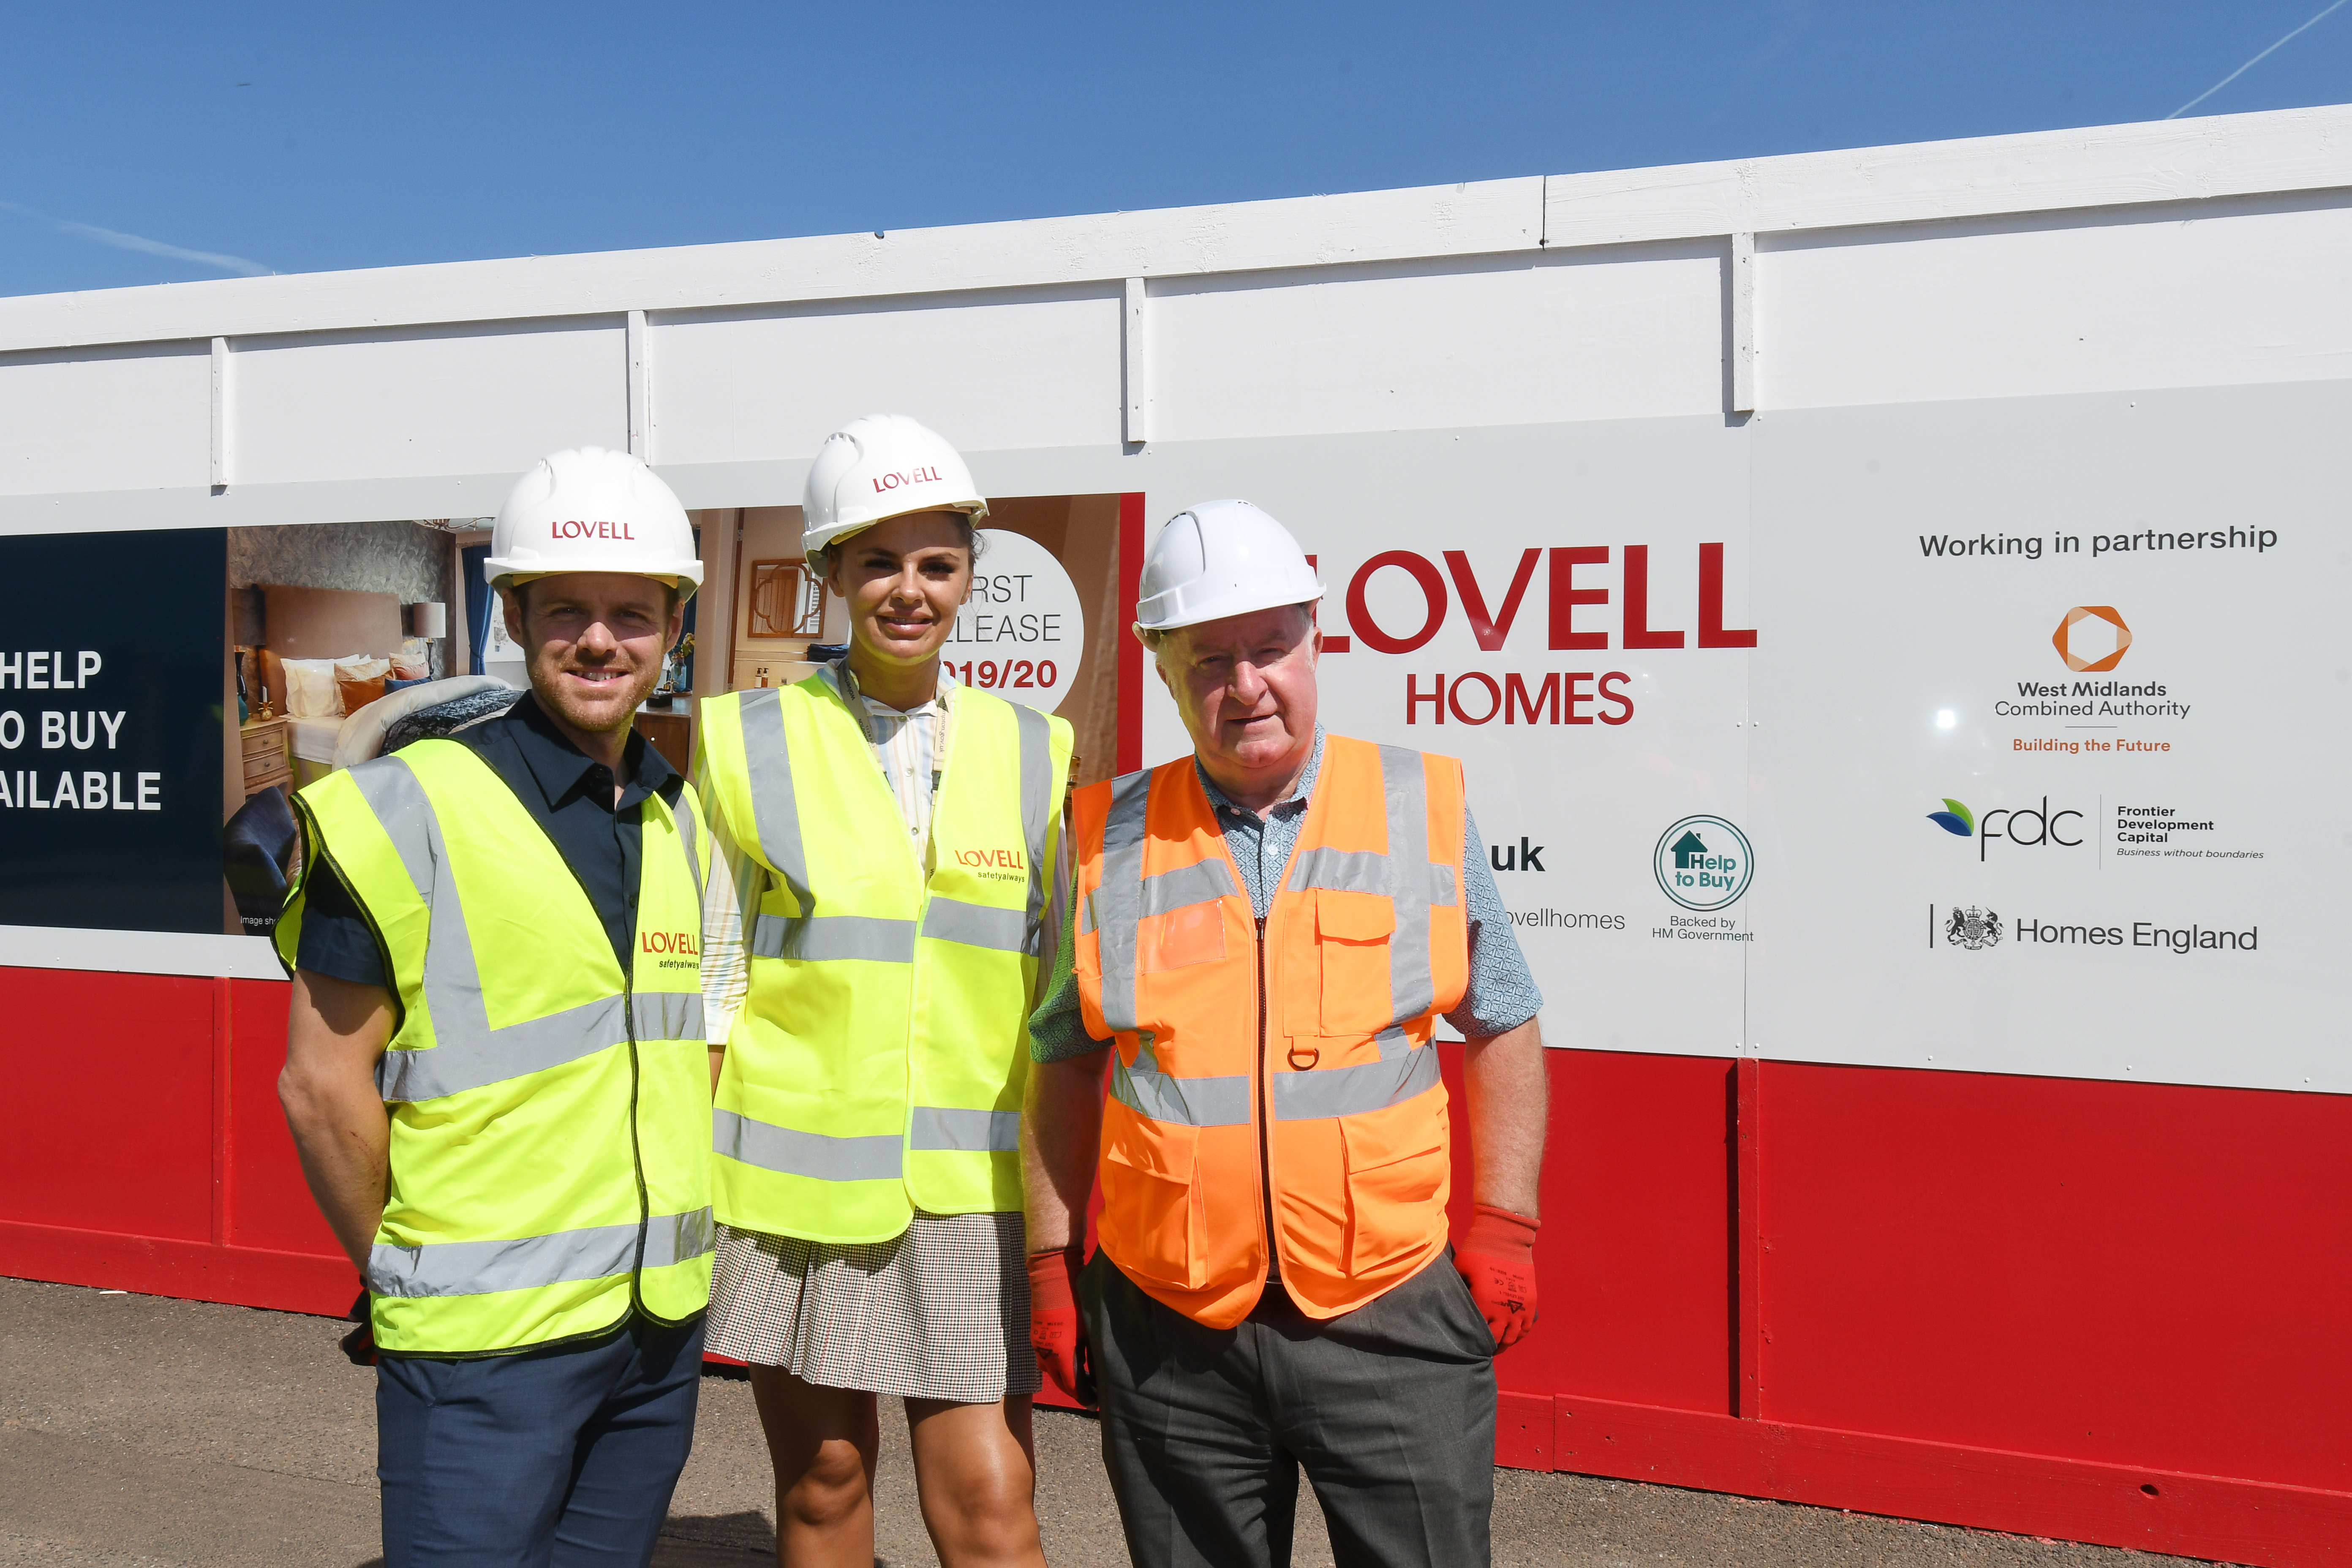 L-R Stuart Penn, regional managing director for Lovell, Cllr Beverley Momenabadi from Wolverhampton City Council (Ettingshall) and Cllr Mike Bird, leader of Walsall Council and WMCA portfolio holder for housing and land